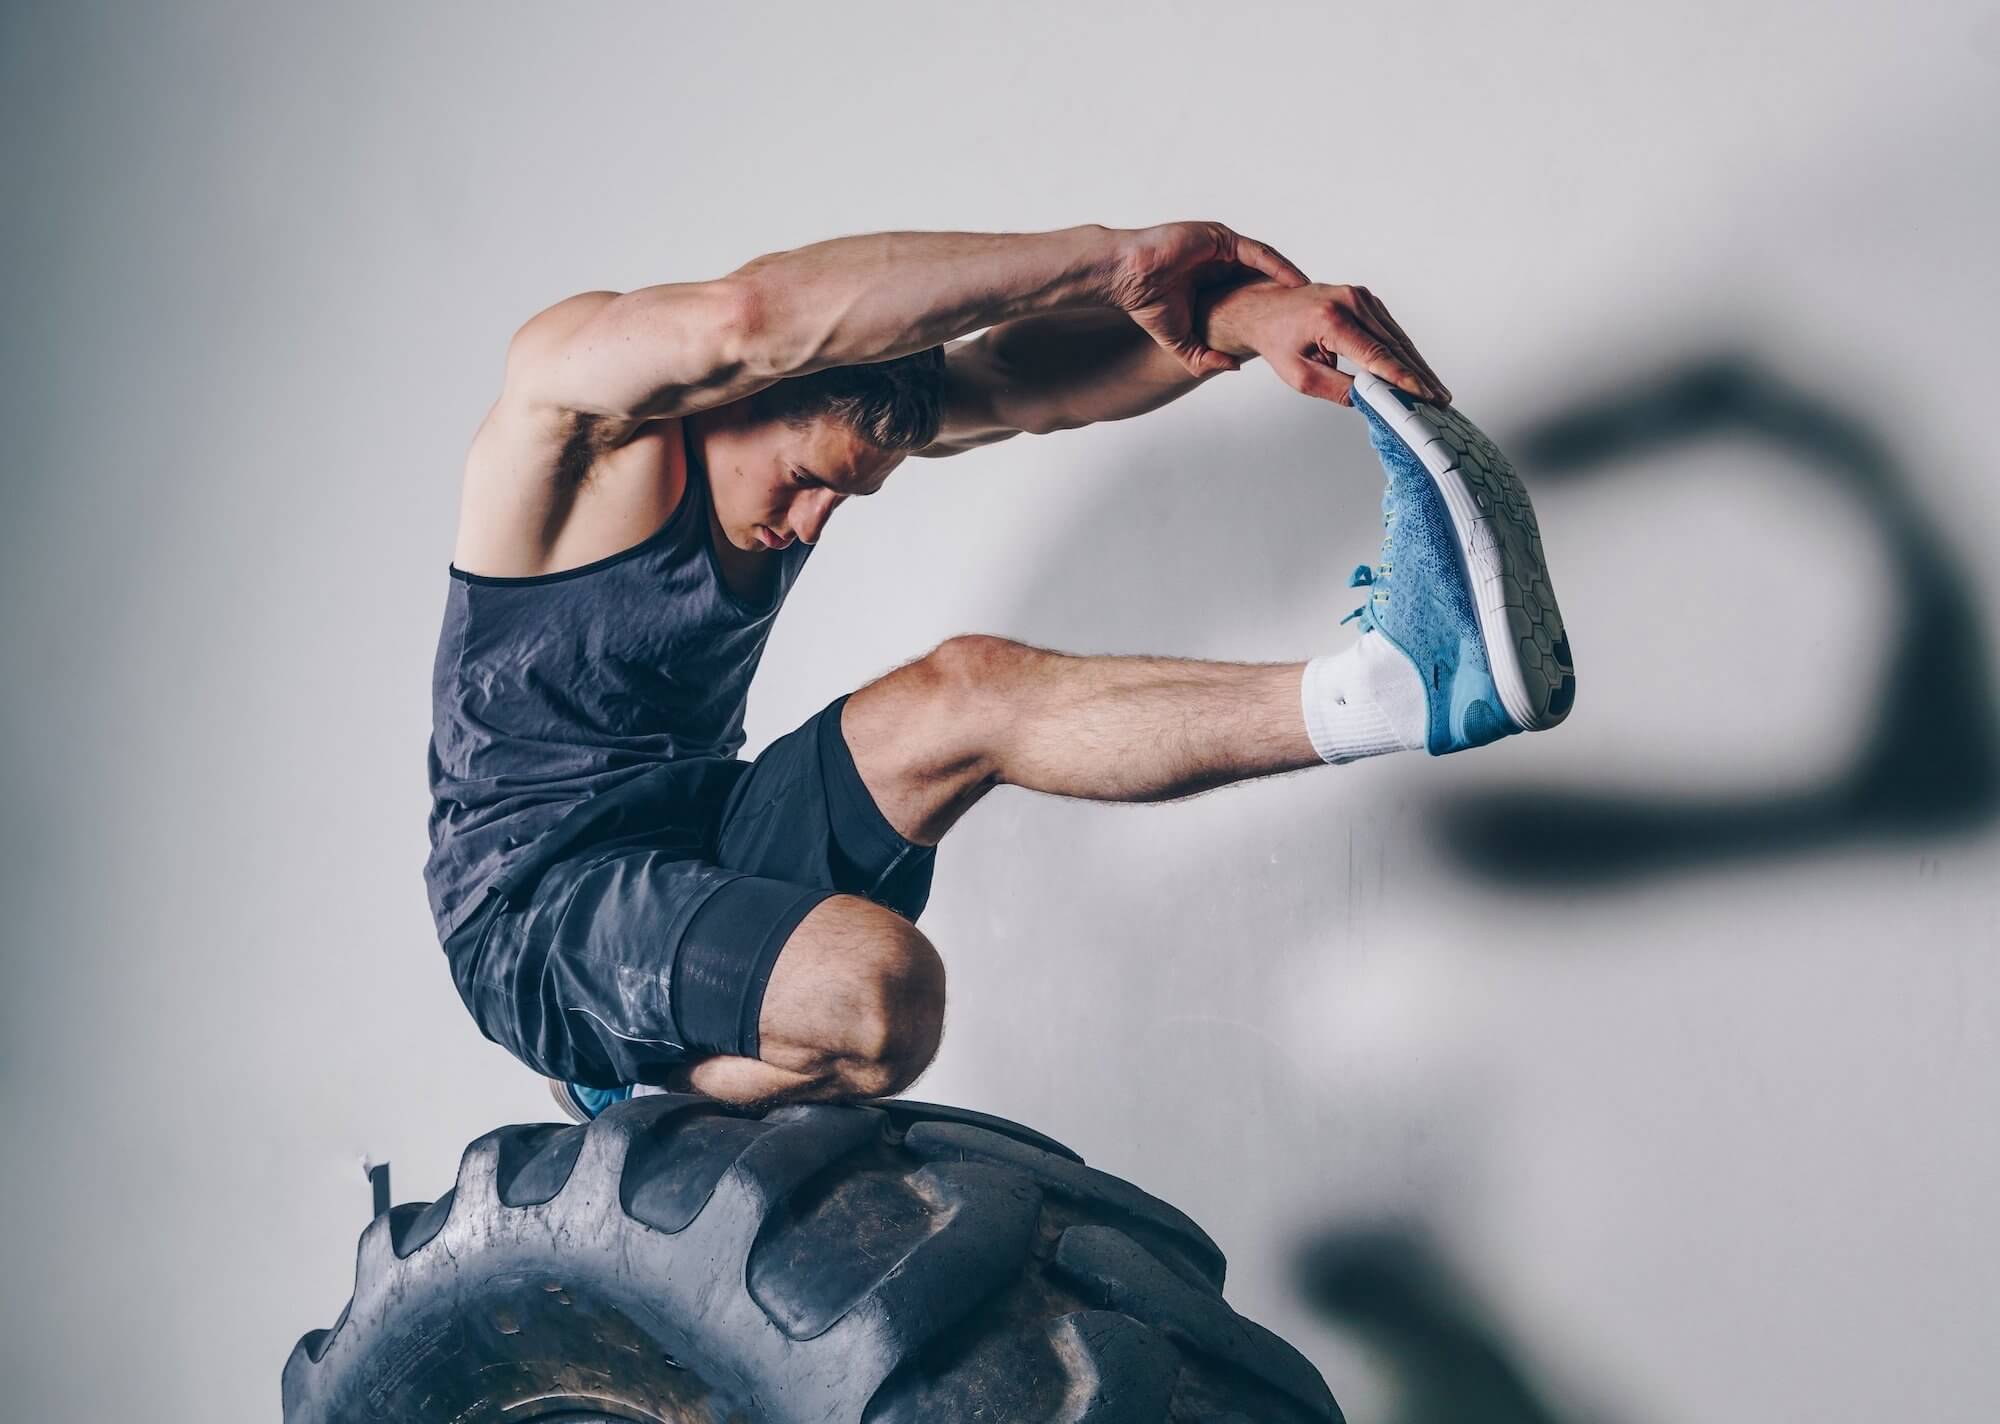 Man in fitness clothing stretching atop a large tire